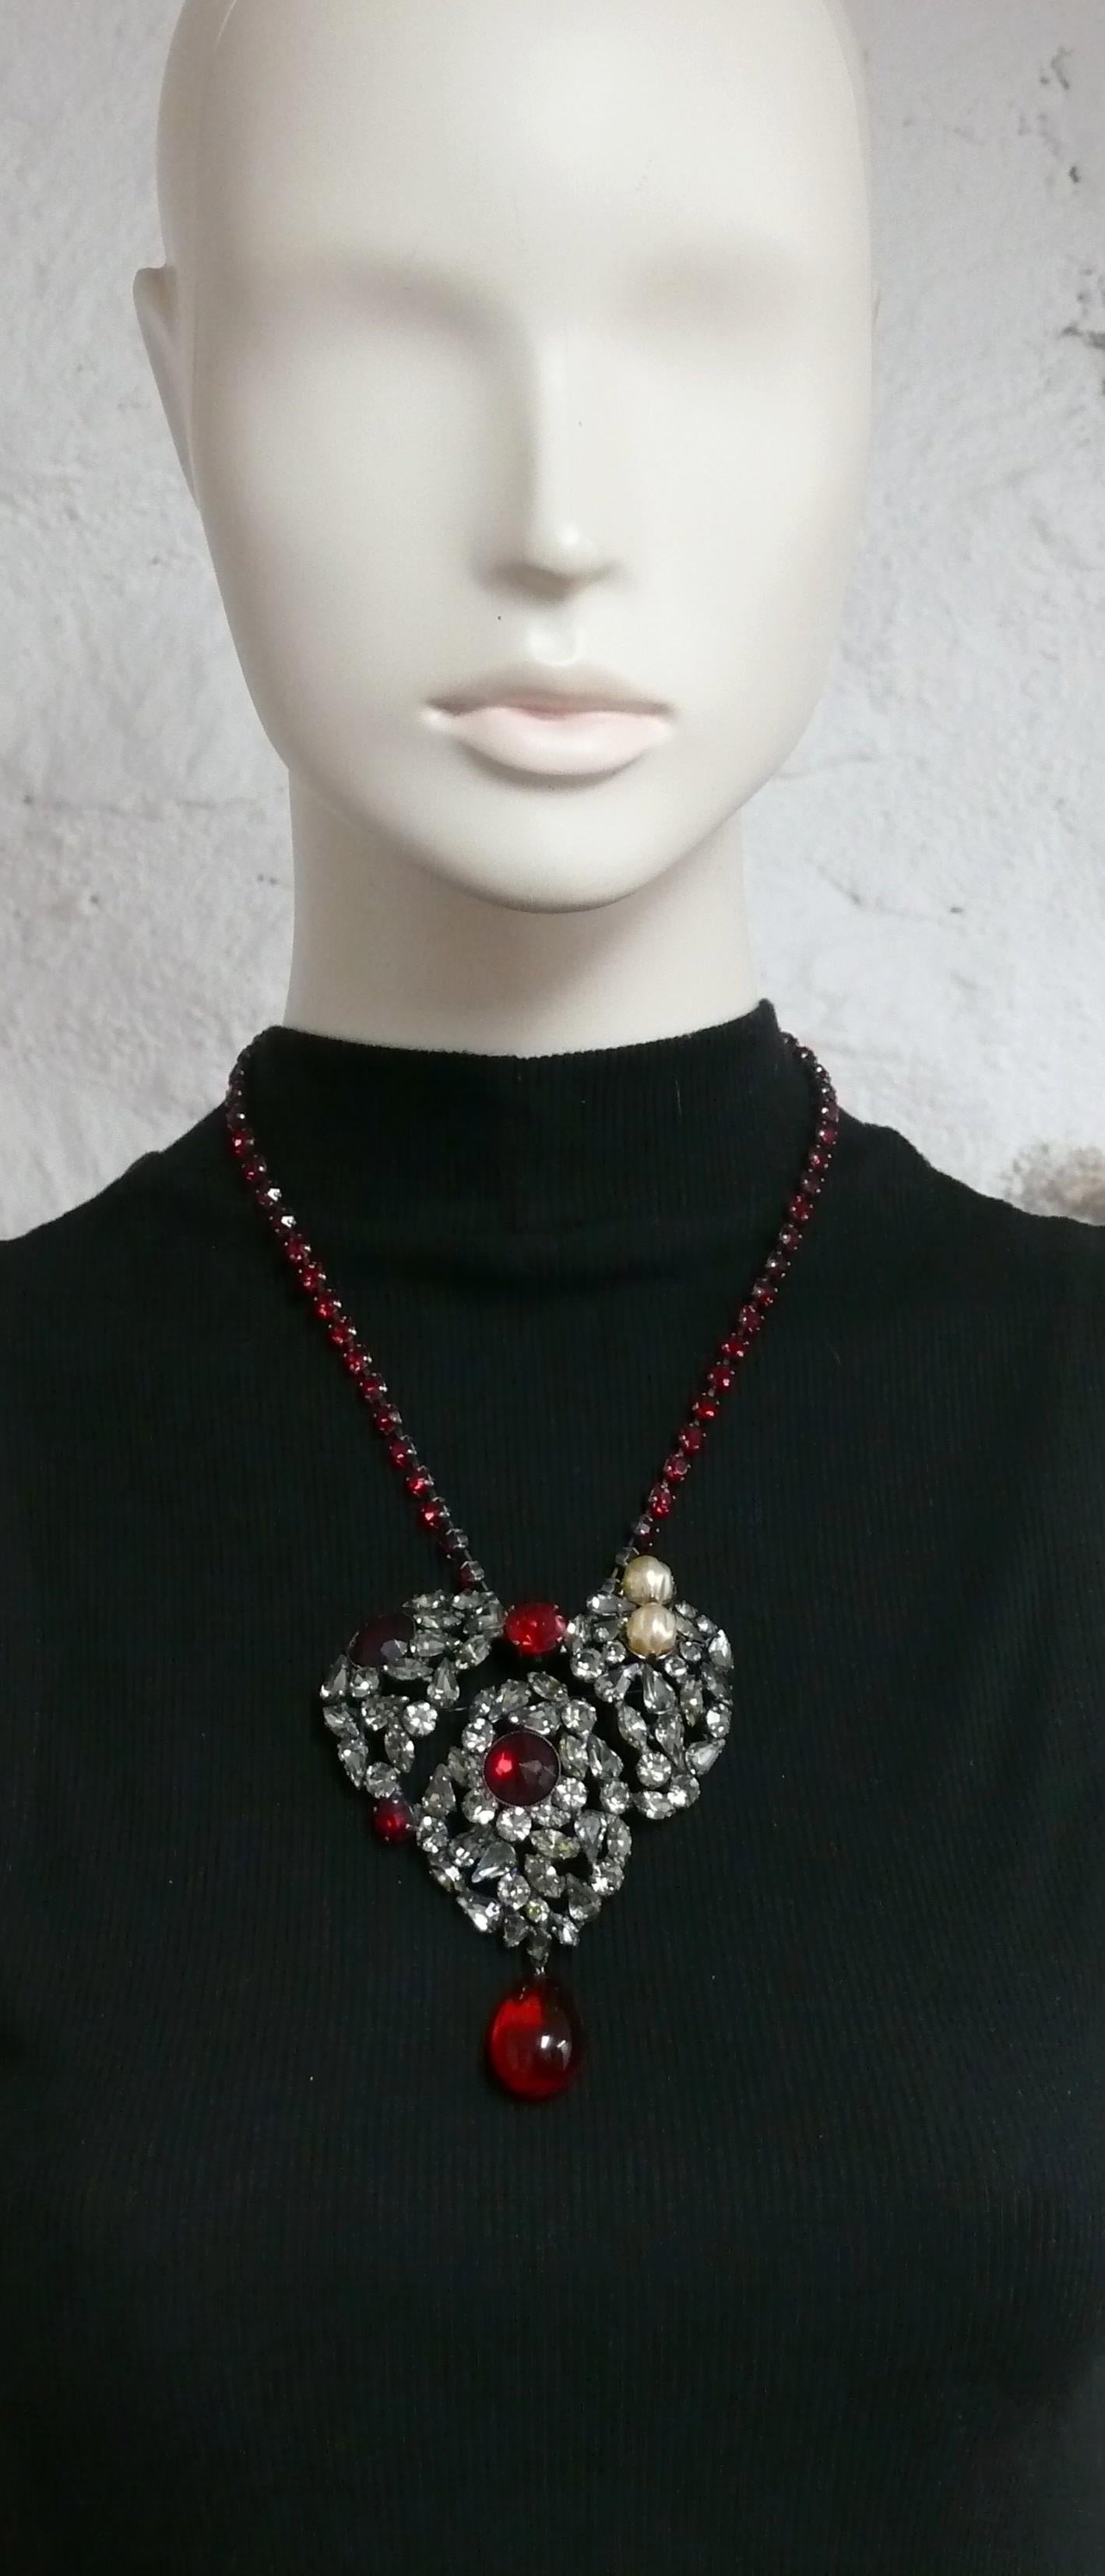 YVES SAINT LAURENT vintage massive iconic pendant necklace featuring a gun metal patina heart embellished with light grey and red crystals, faux pearls, red glass drop and a ruby rhinestone chain.

Similar model worn by LAETITIA CASTA on the catwalk